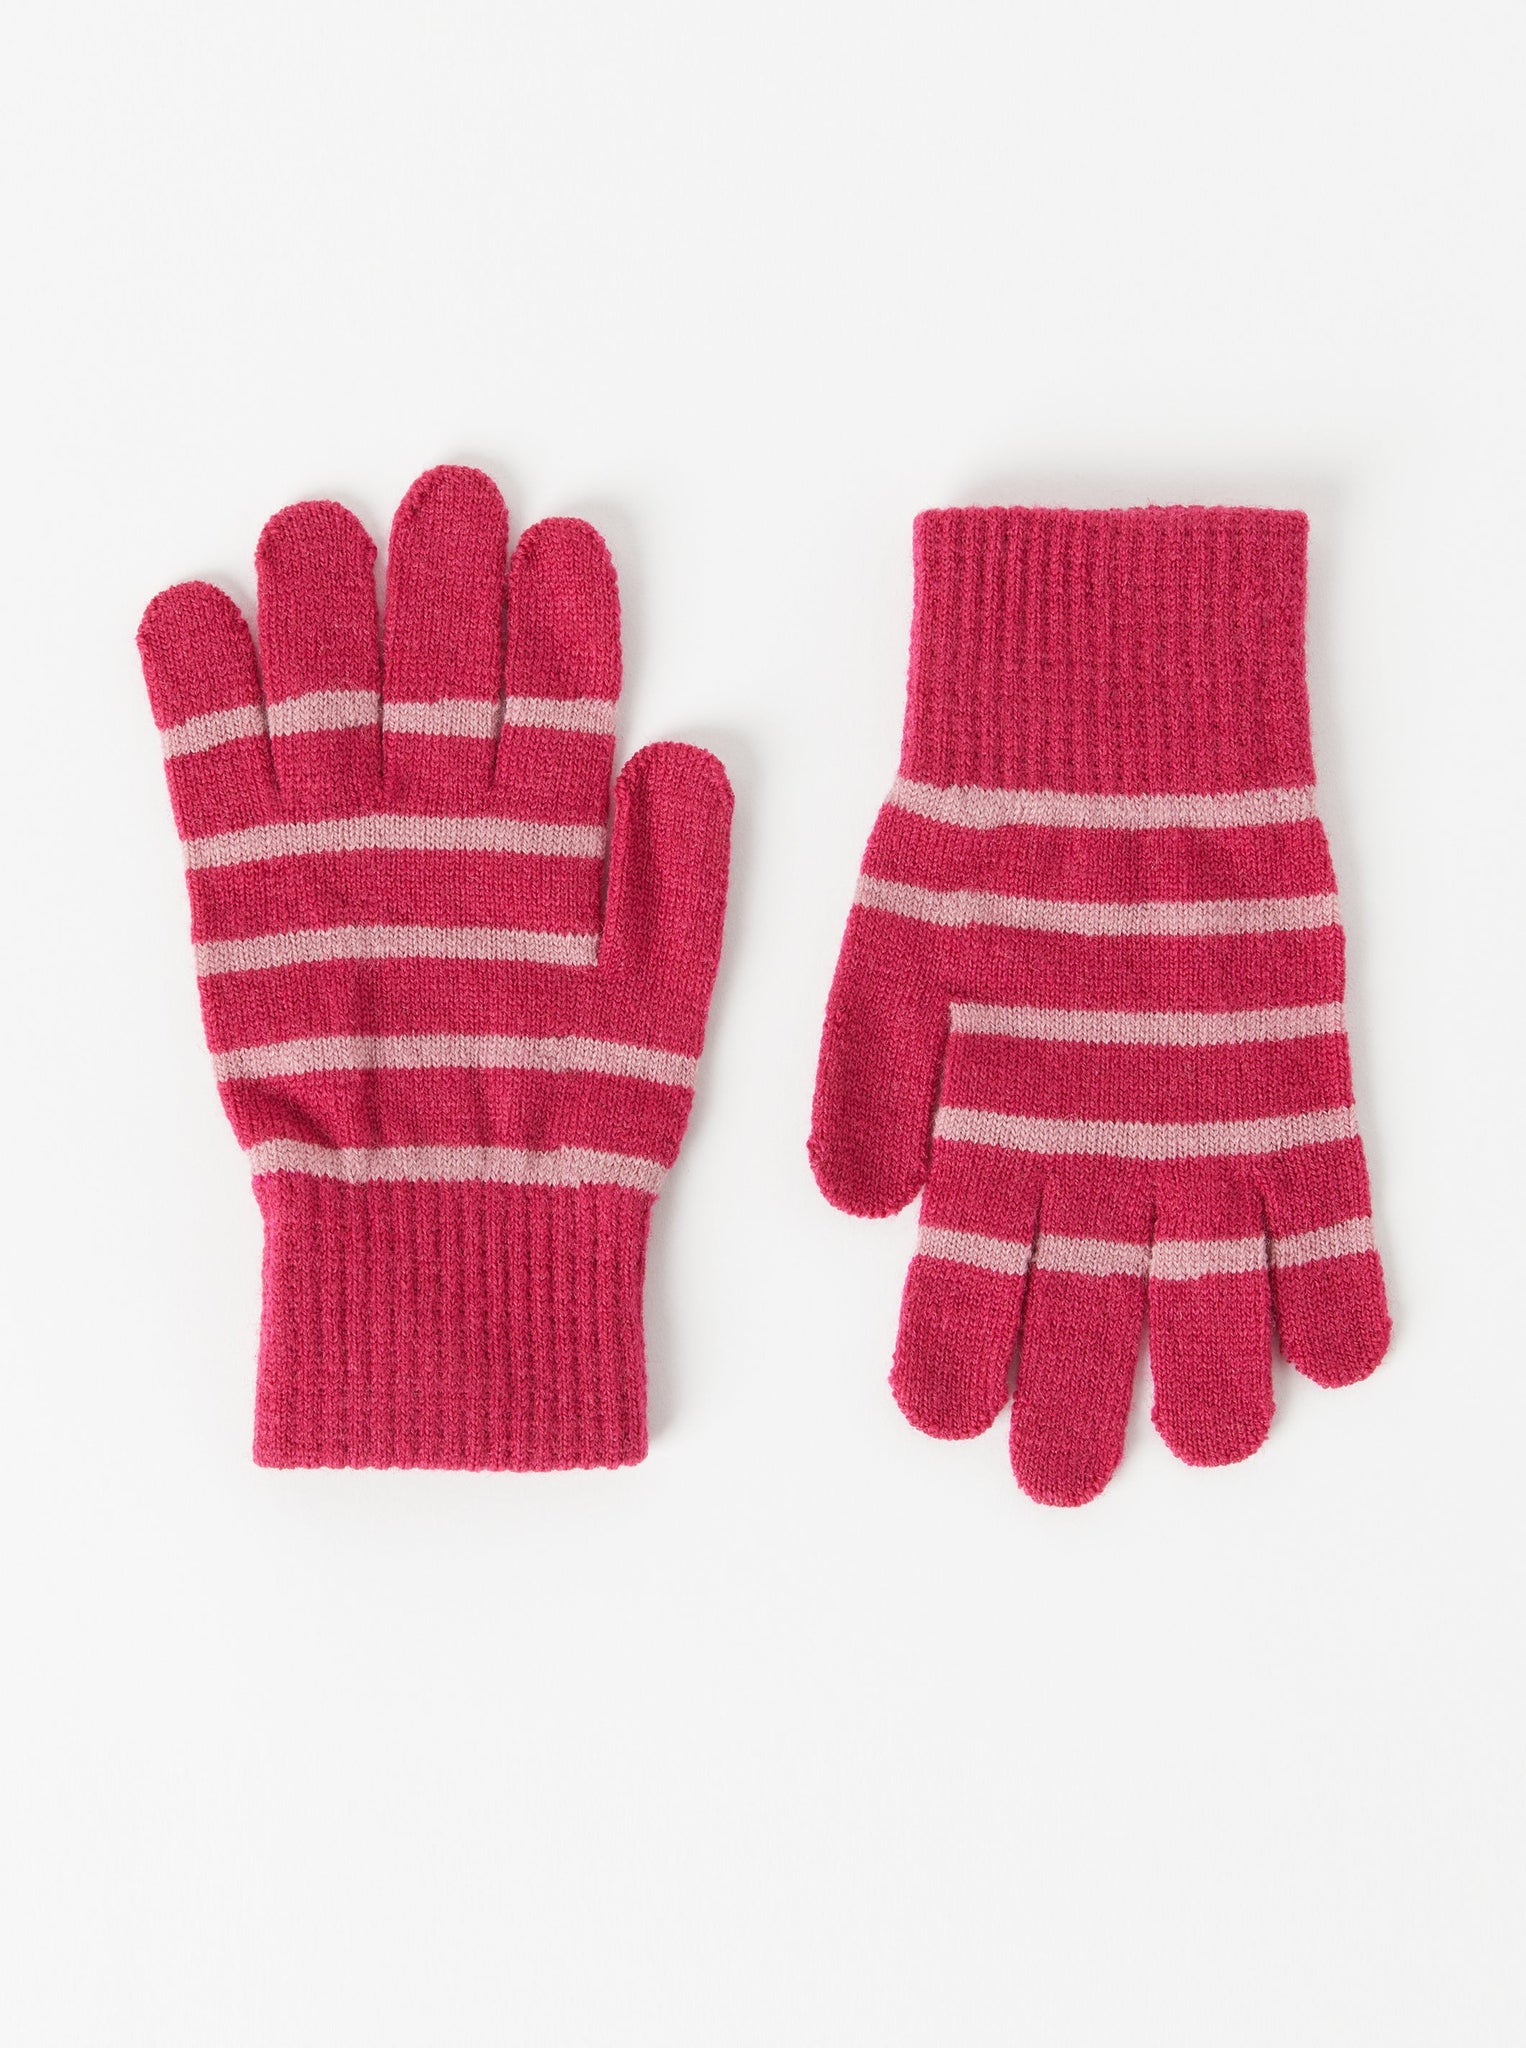 Red Magic Kids Gloves Multipack from the Polarn O. Pyret kidswear collection. Sustainably produced kids outerwear.